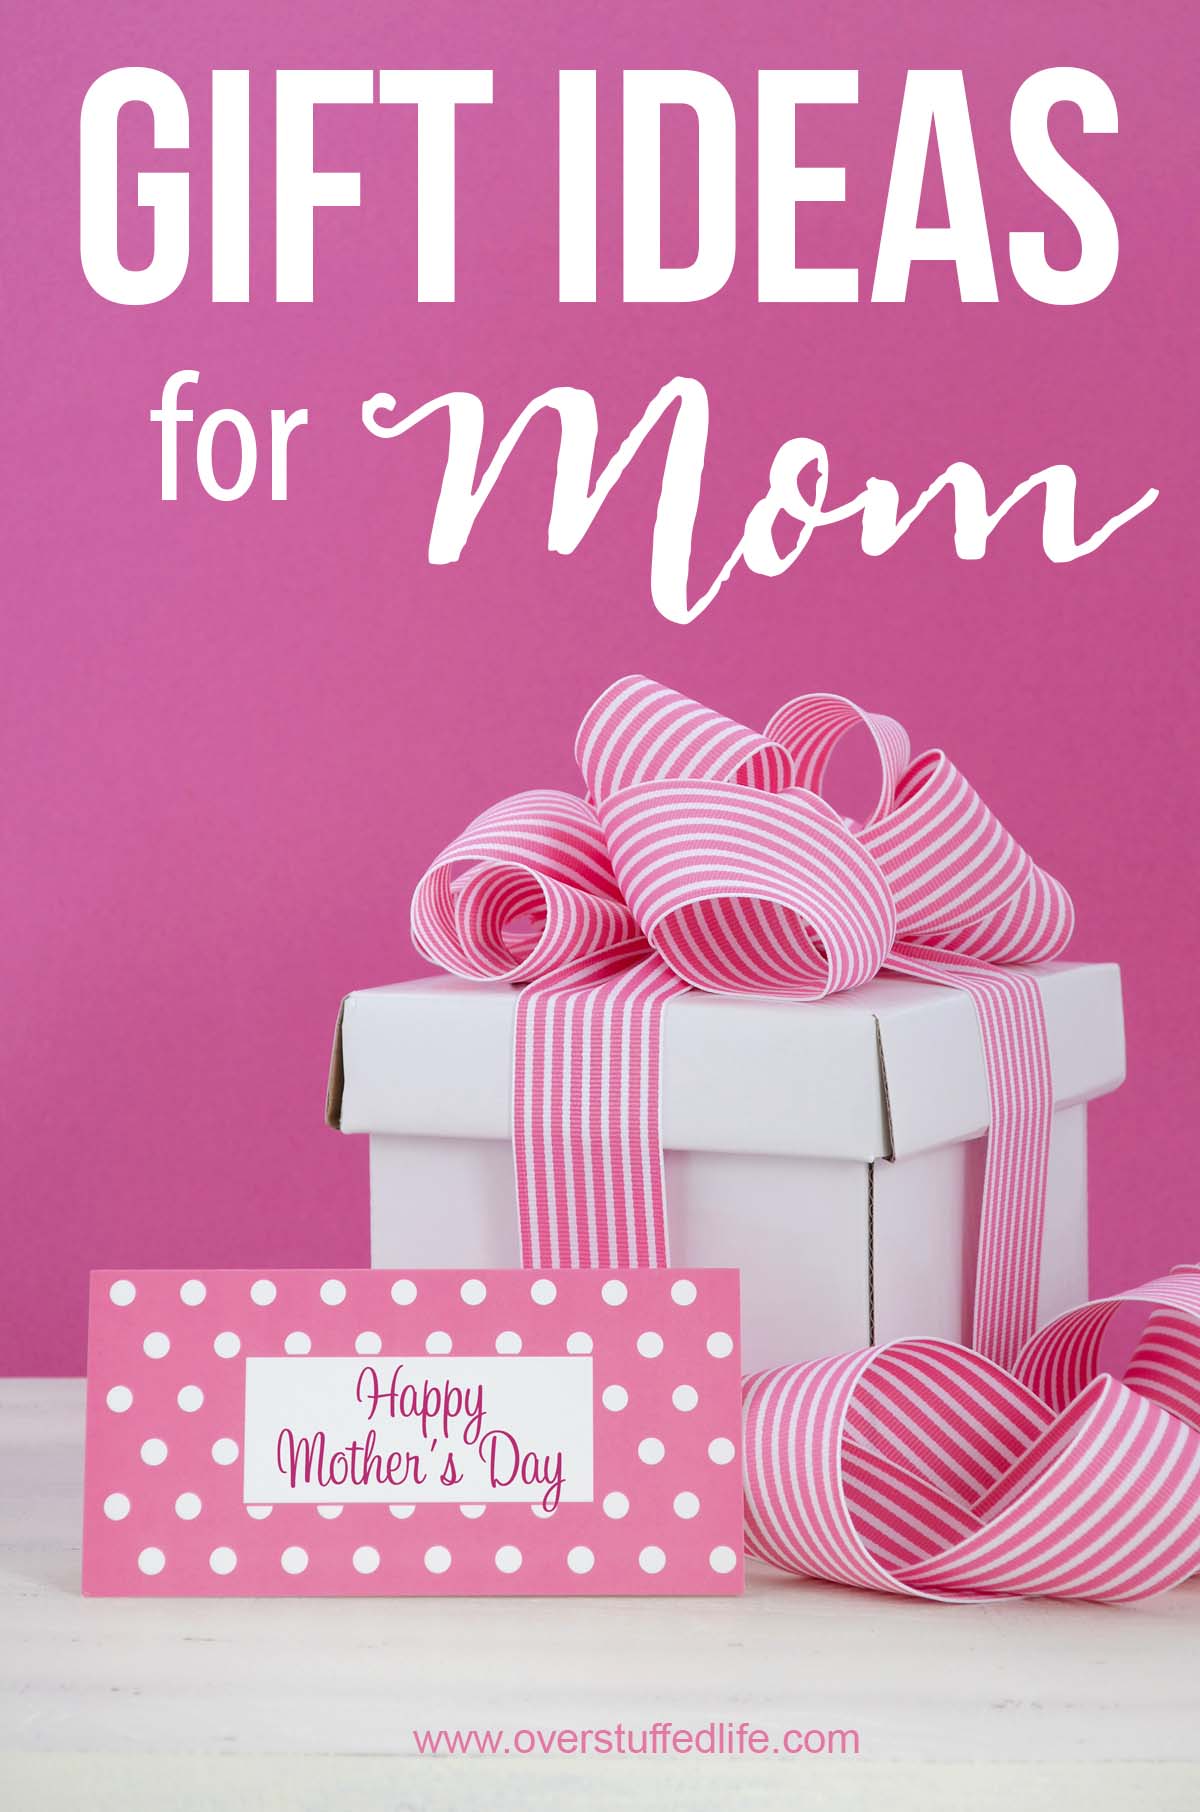 Mother's Day: Cheap, Easy, Thoughtful Last Minute Gifts | Money